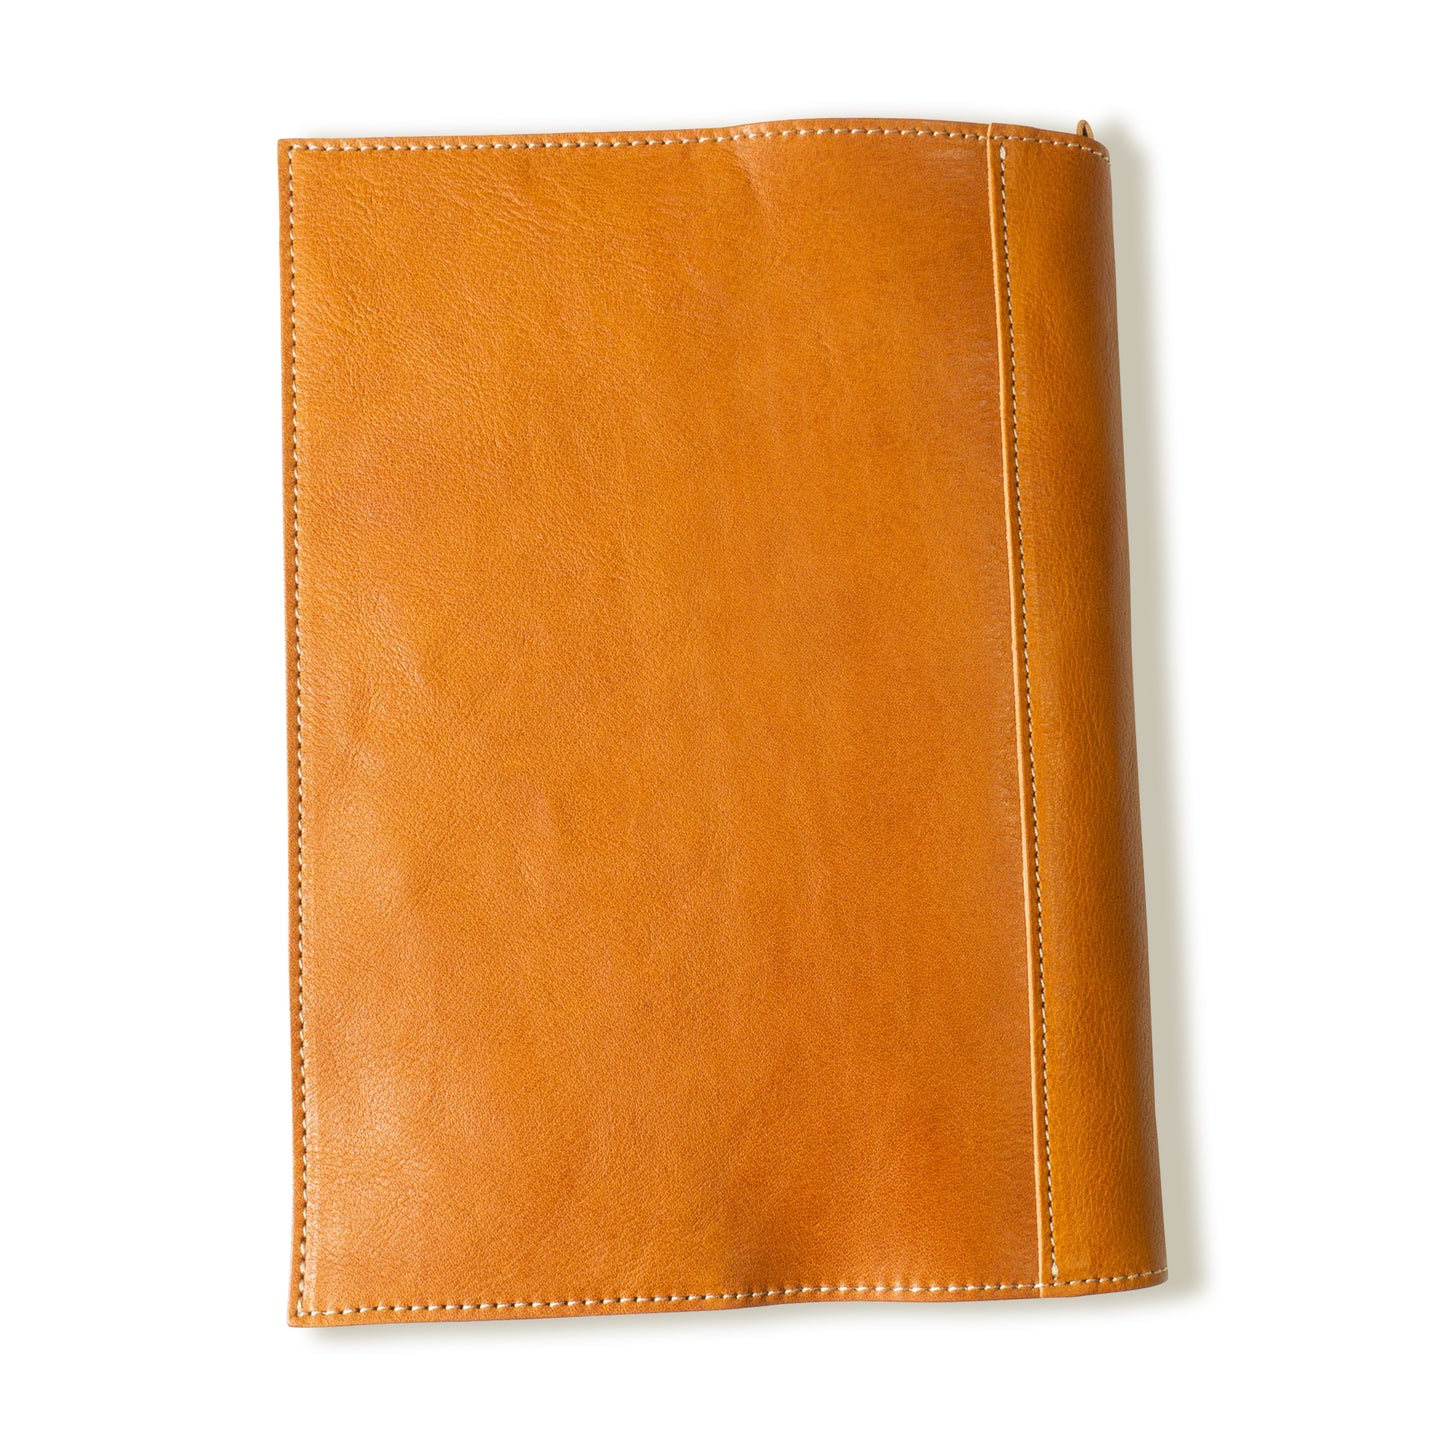 [Japanese Craftsman Made / Shrink] Book cover A5 hard cover Genuine leather bookmark included